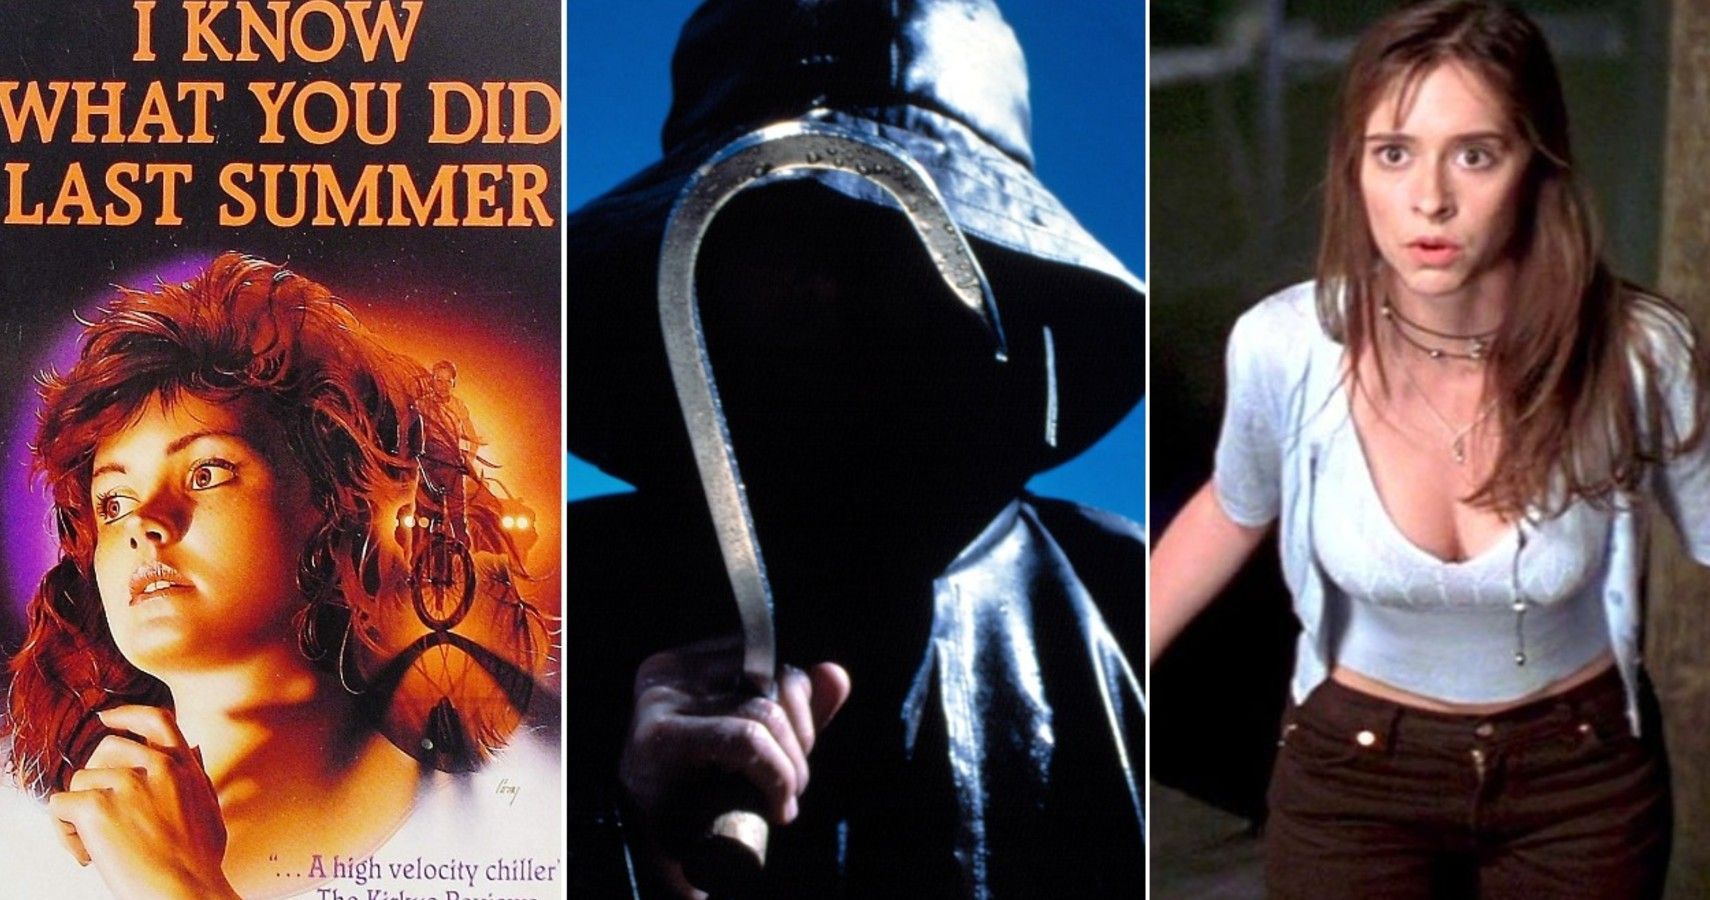 10 Awesome Facts About The Filming & Production Of I Know What You Did Last Summer